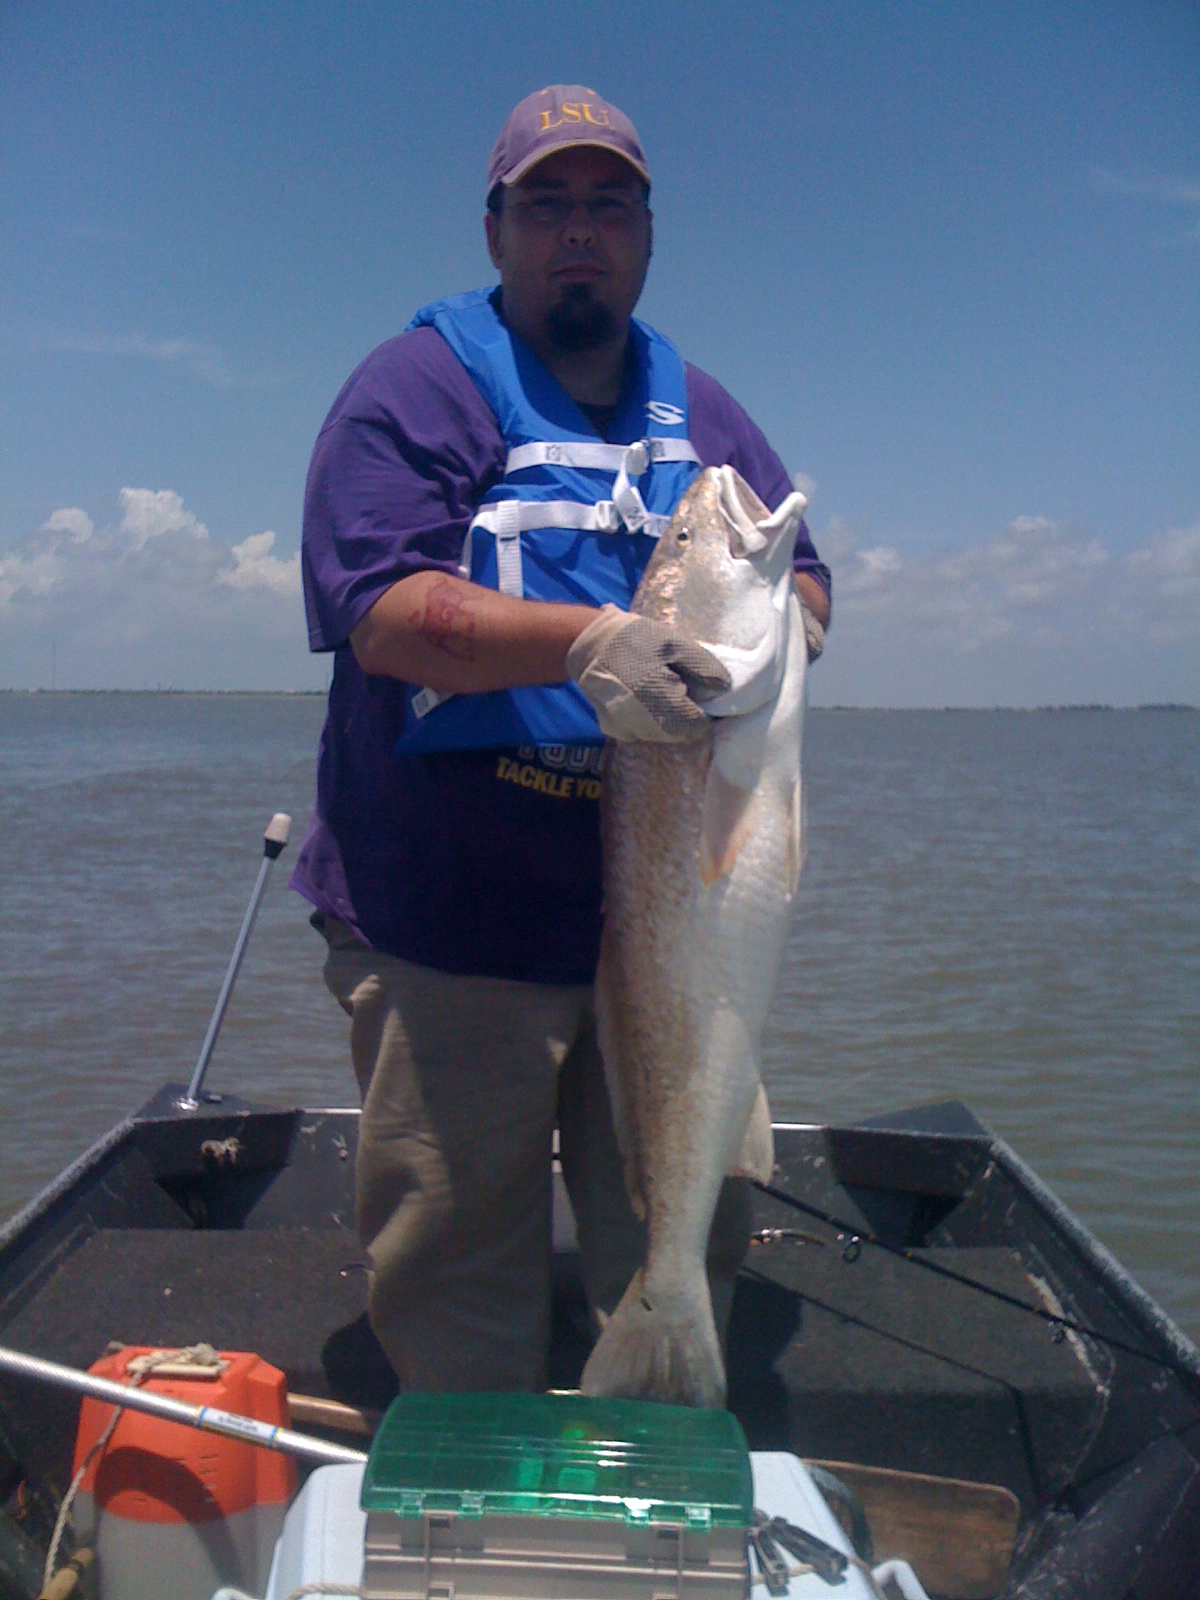 People think it's photo shopped because they've never seen a life vest so large. And YES, I did fuck this fish.